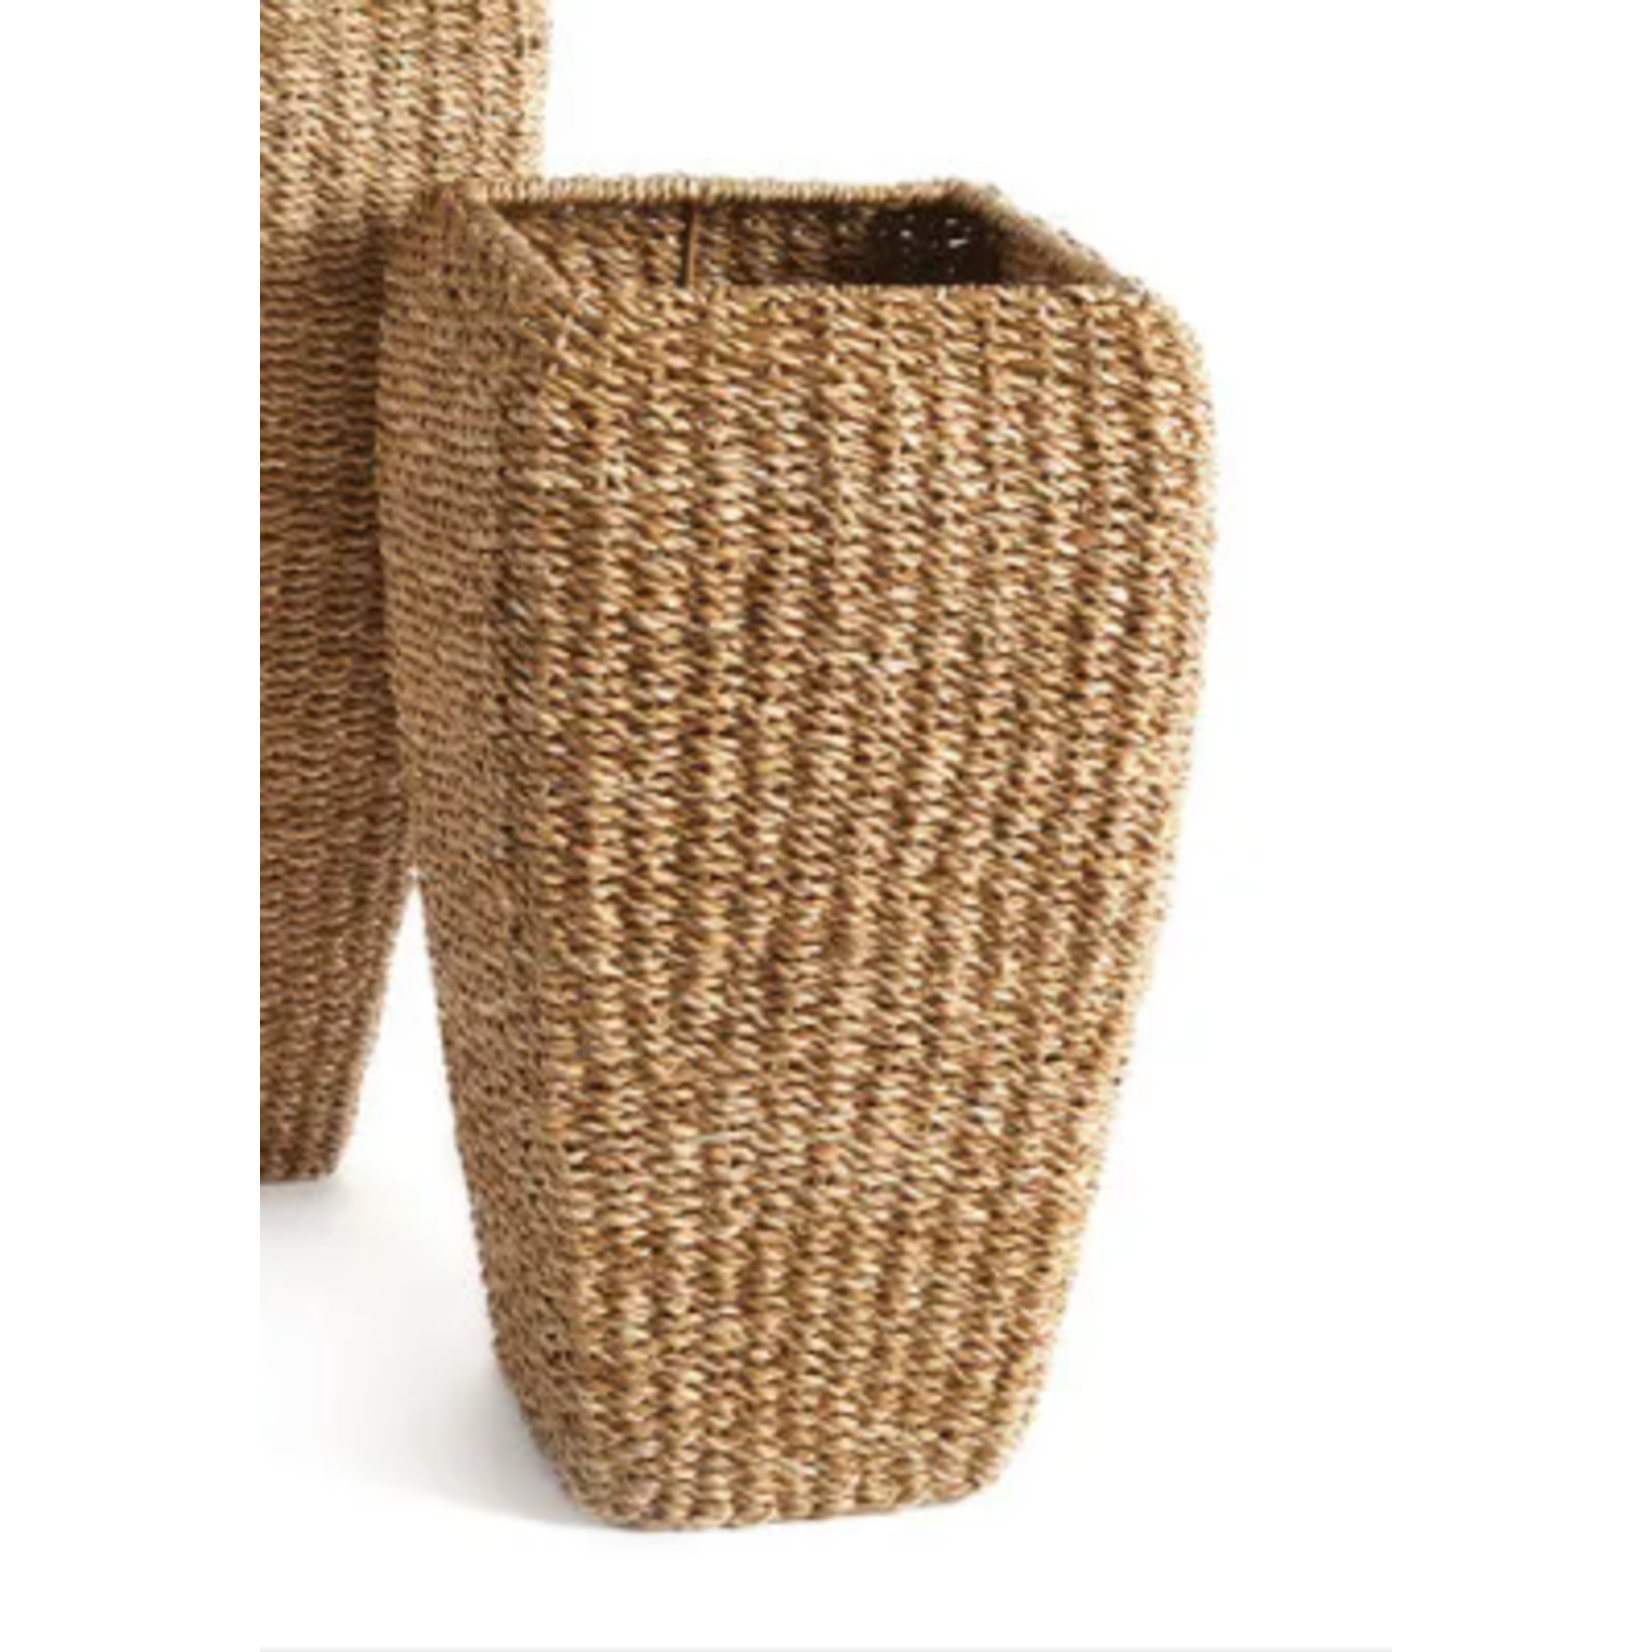 Napa Home and Garden Seagrass Tall Square Planter Large